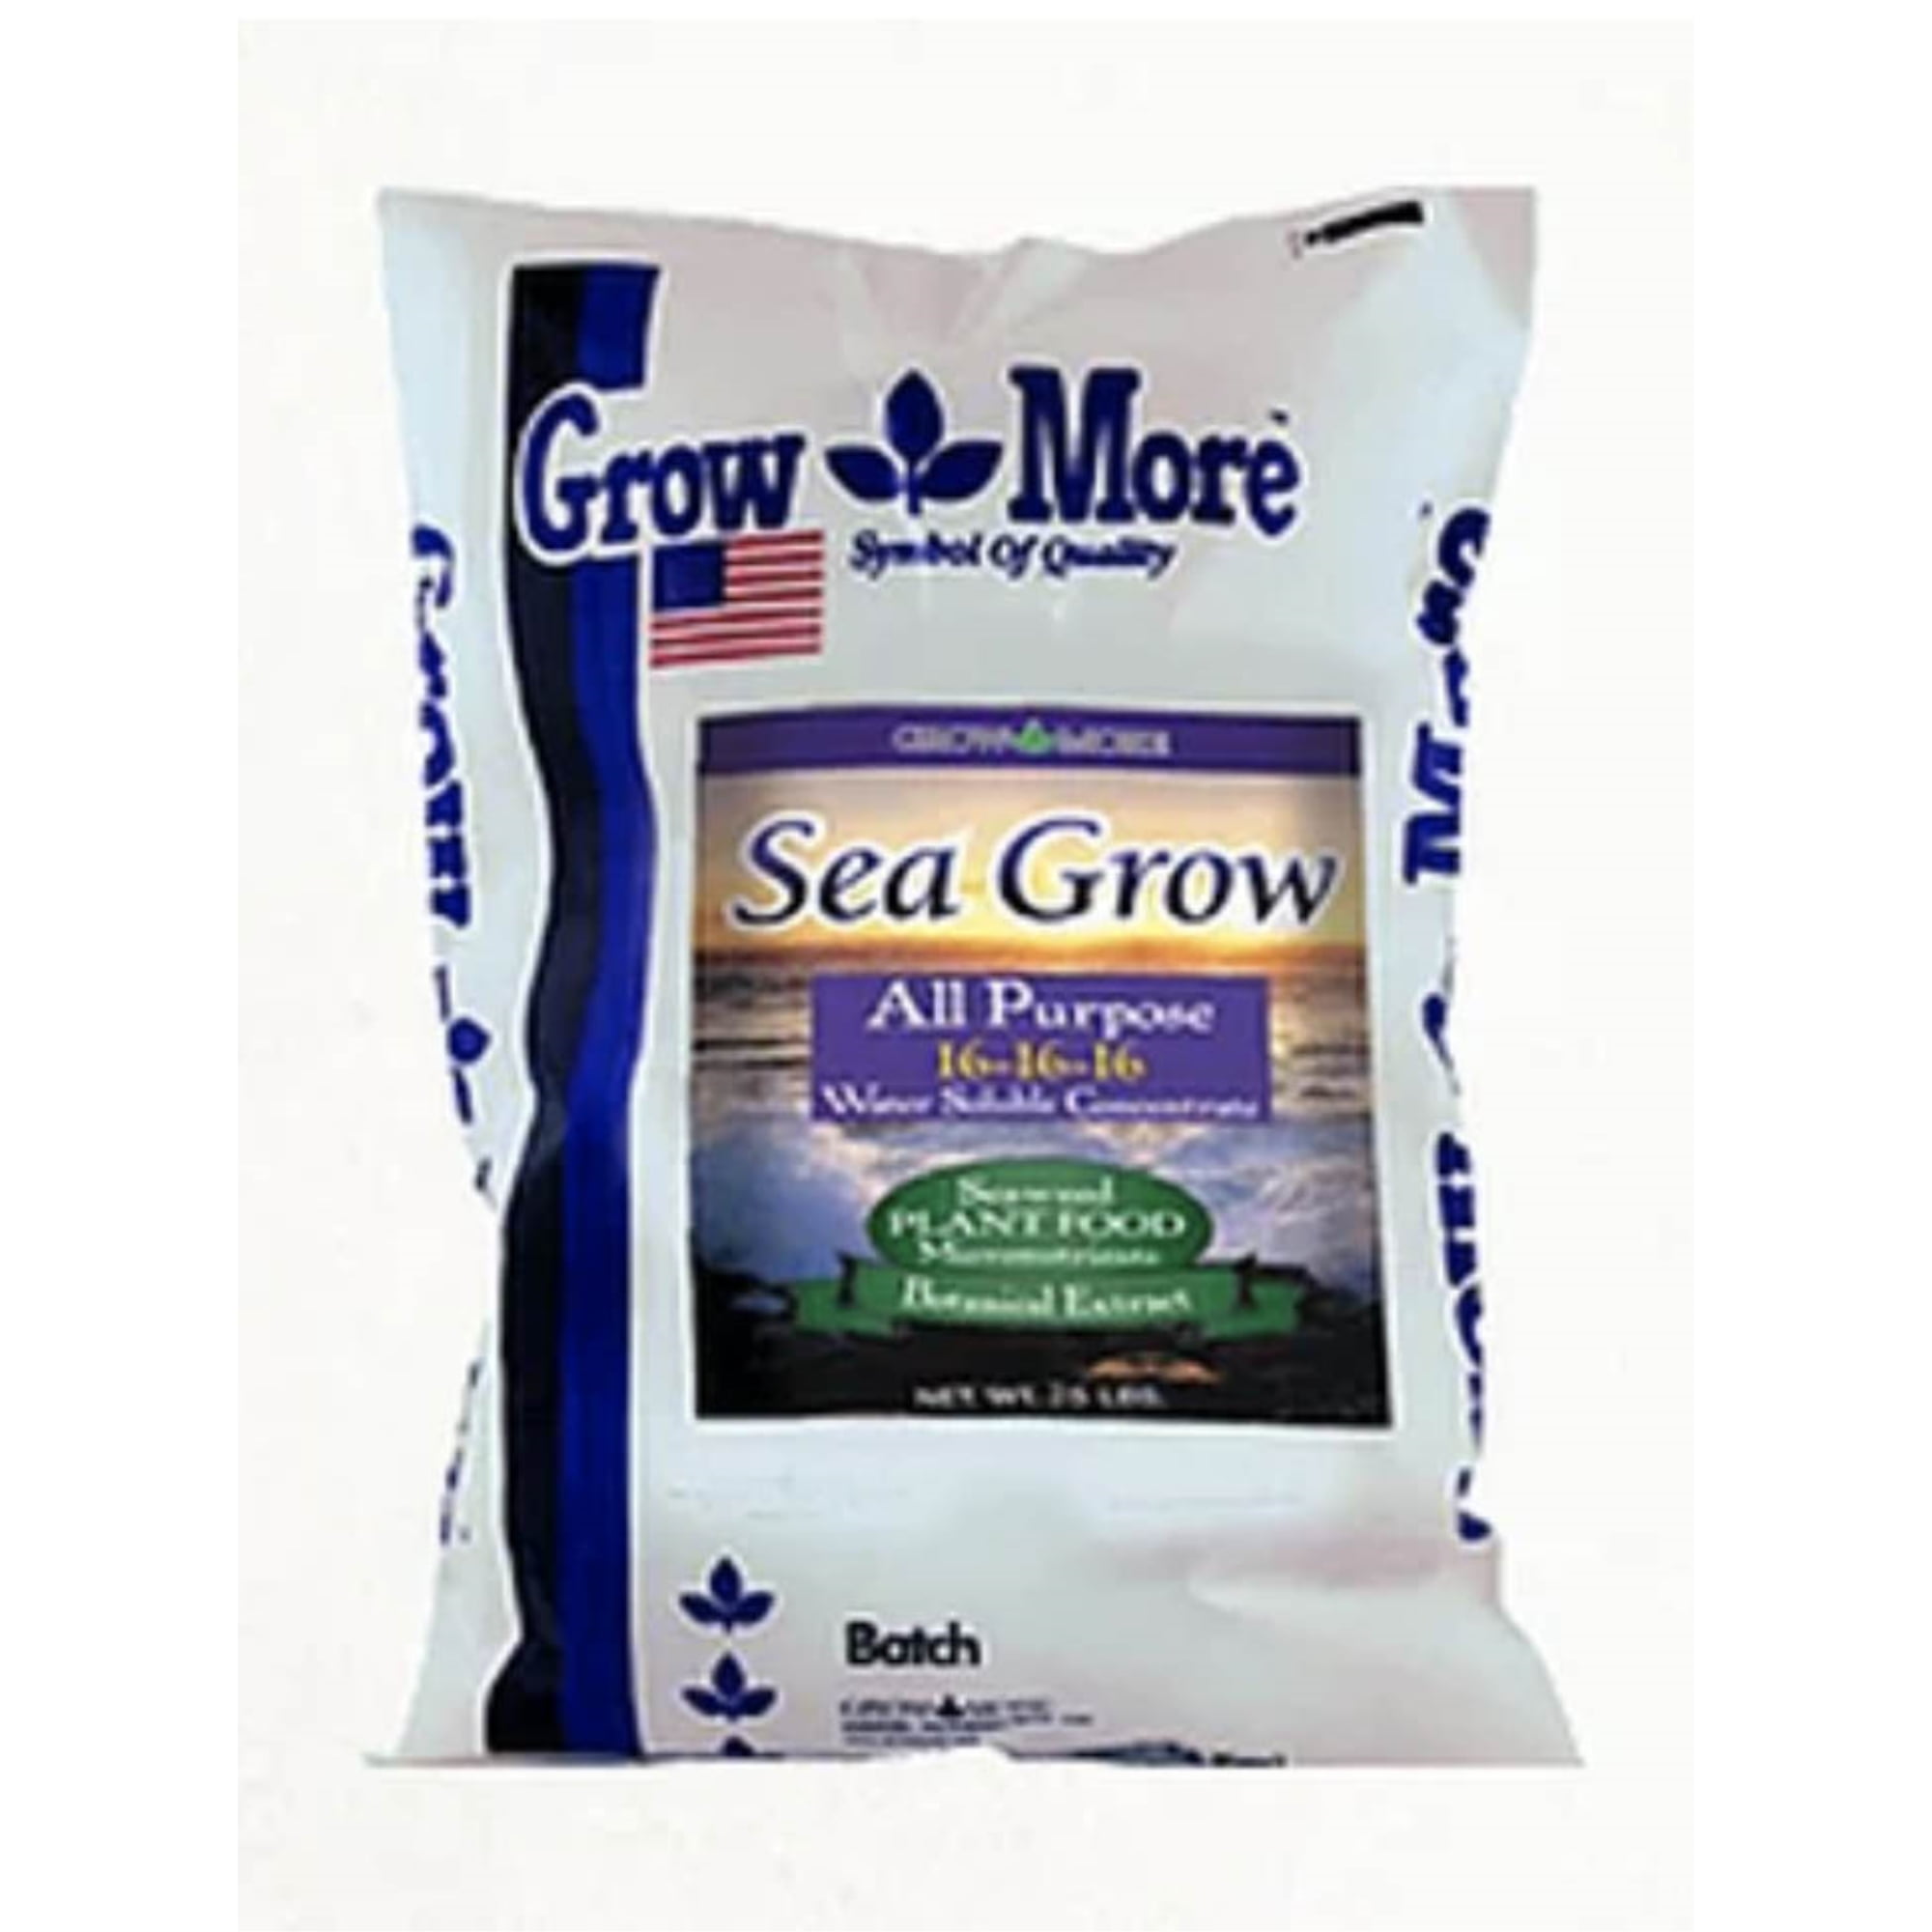 Grow More 5010 All Purpose Fertilizer 20-20-20 25-pound for sale online 